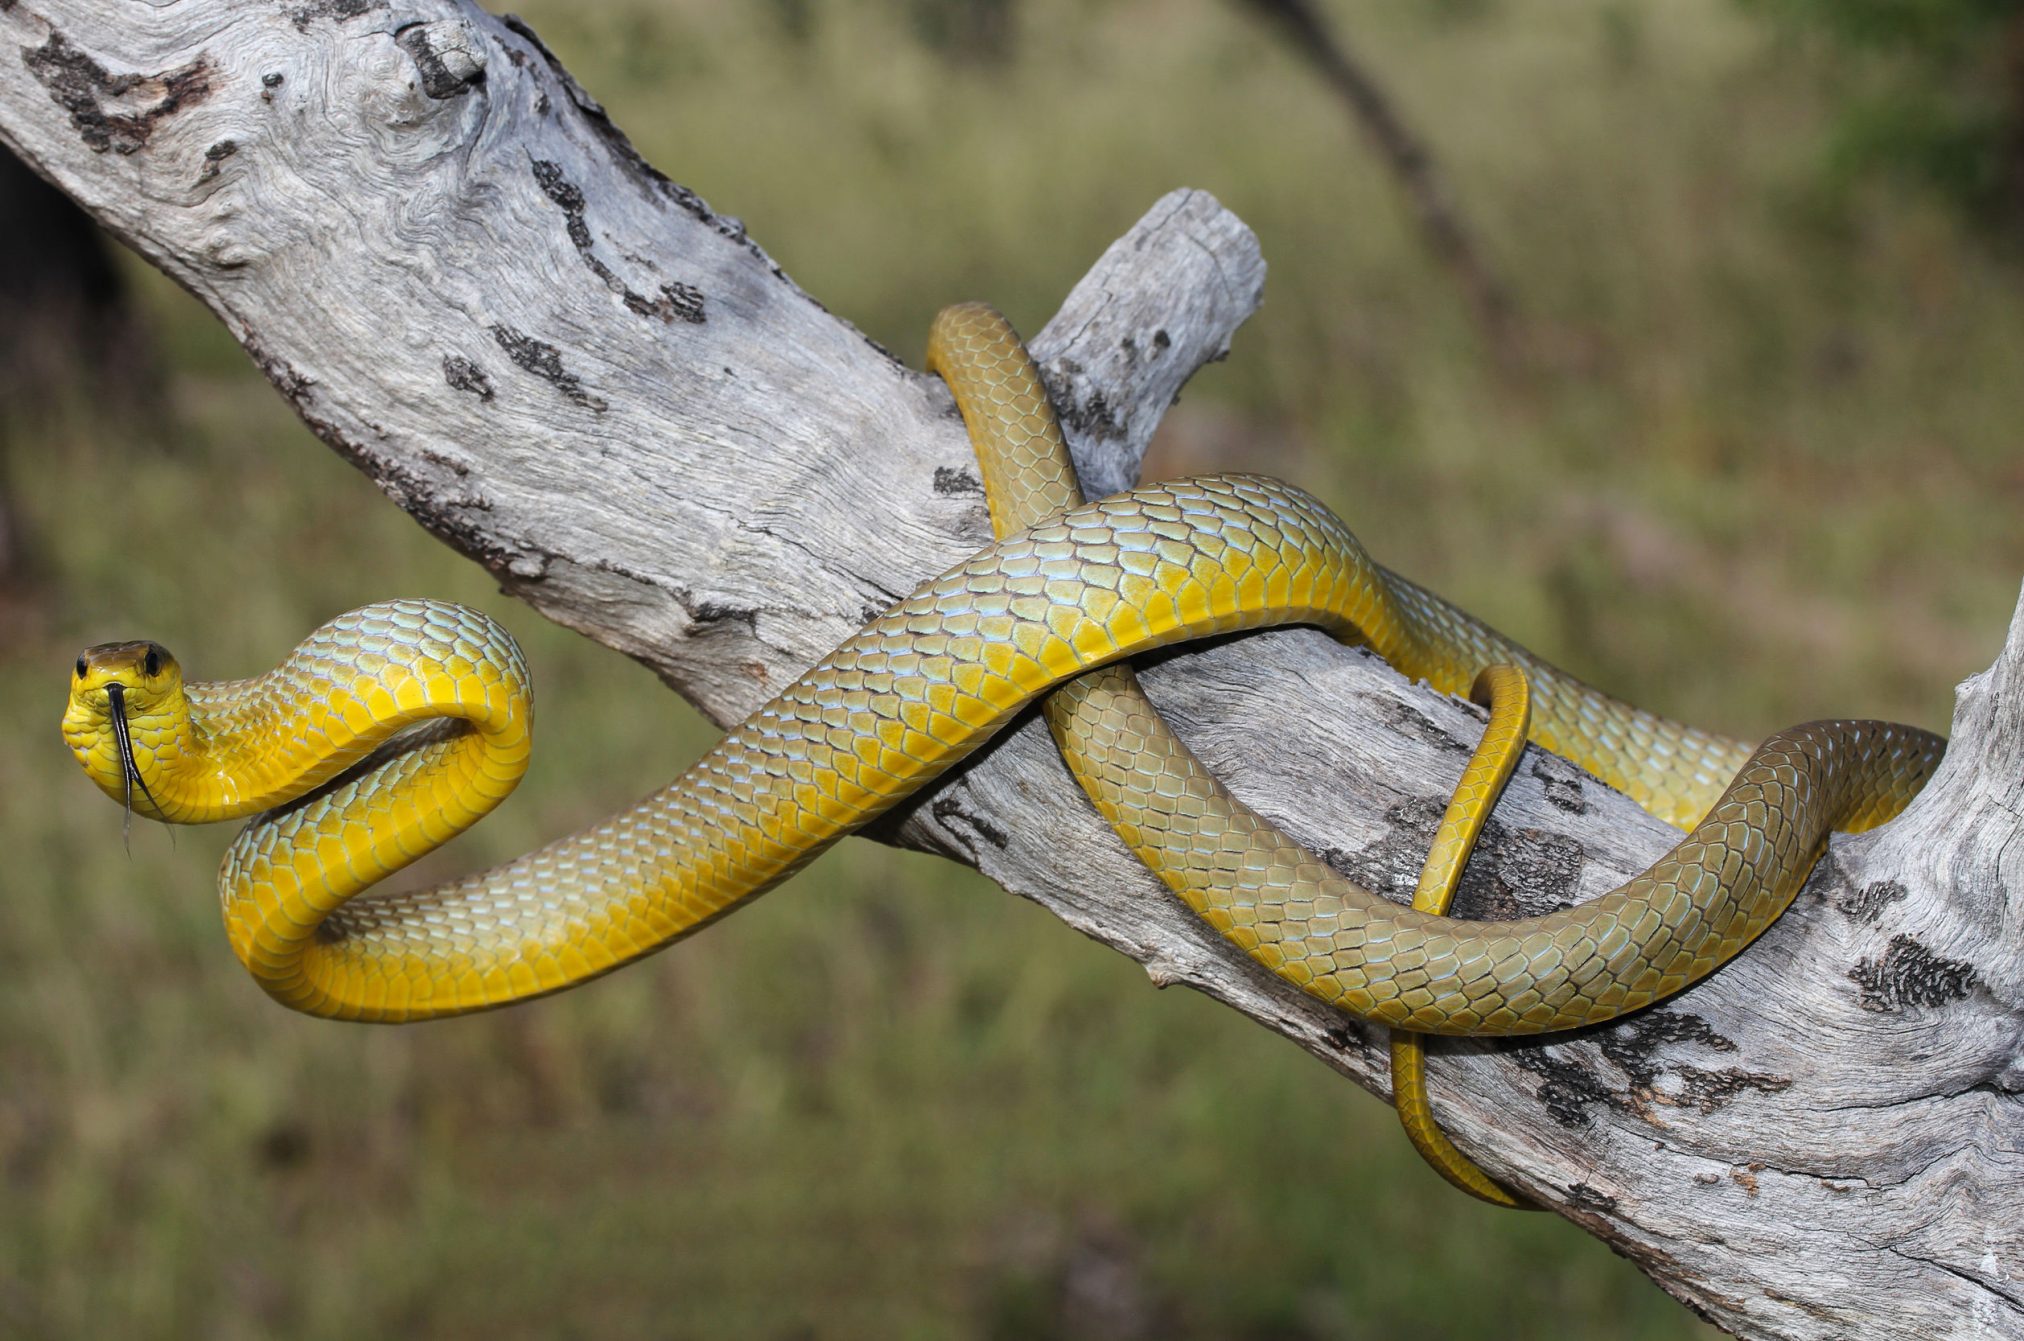 58675188 - the common tree snake, dendrelaphis punctulatus, is a slender, large-eyed, non-venomous, diurnal snake of many parts of australia, especially in the northern and eastern coastal areas.